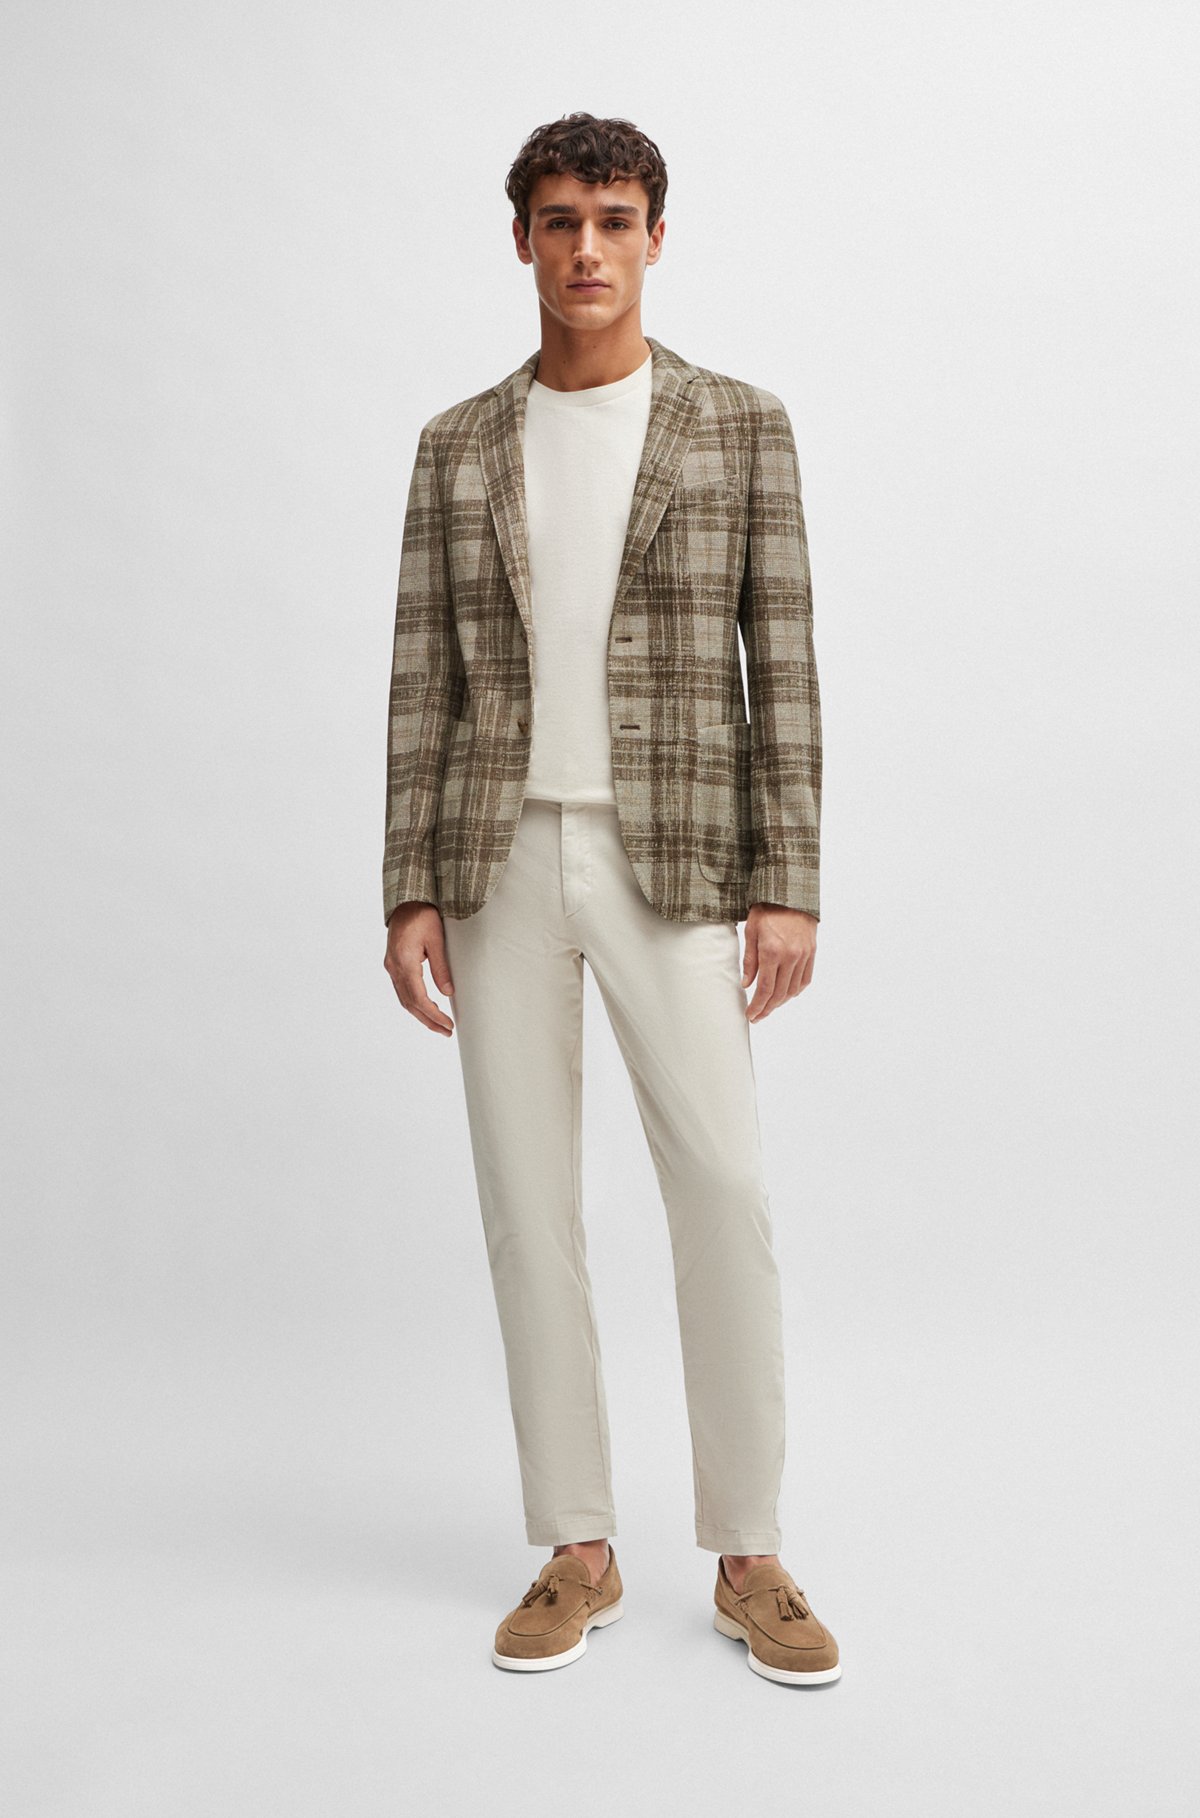 BOSS - Slim-fit jacket in checked stretch jersey